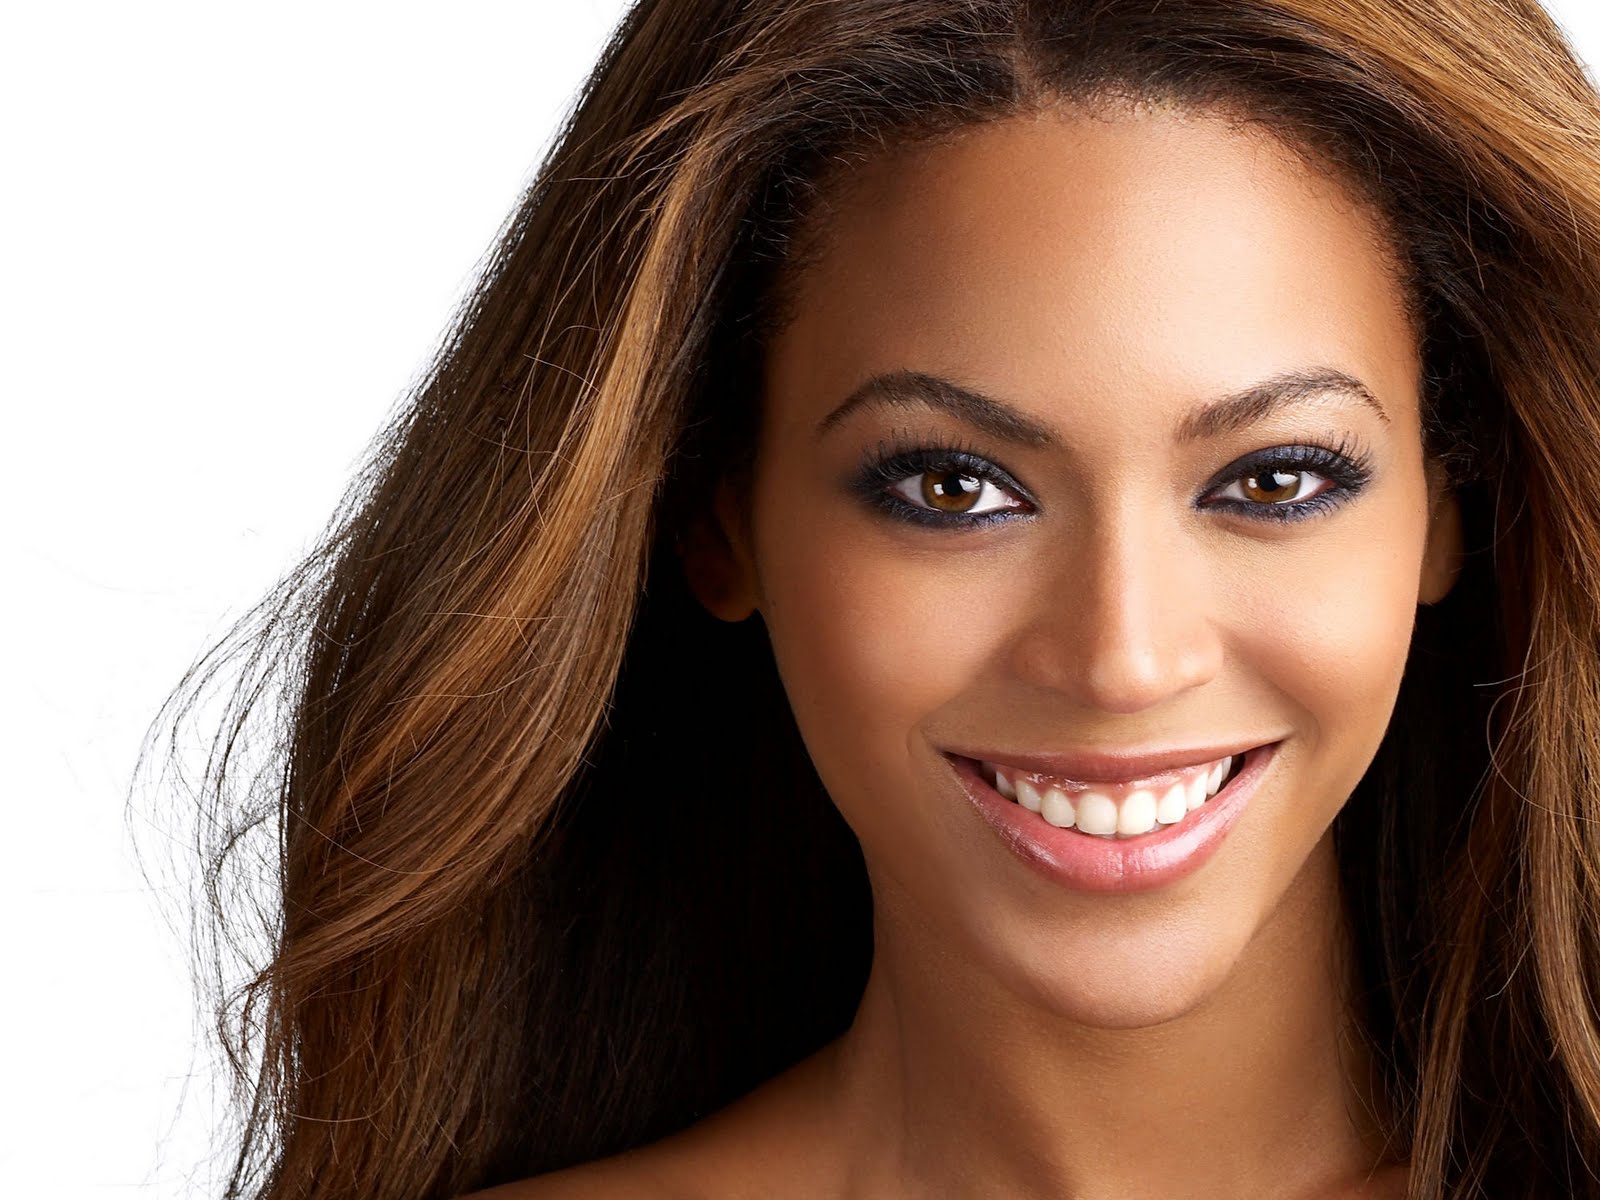 Labels: Beyonce Knowles Photo Gallery , Hot Beyonce Knowles Pictures.